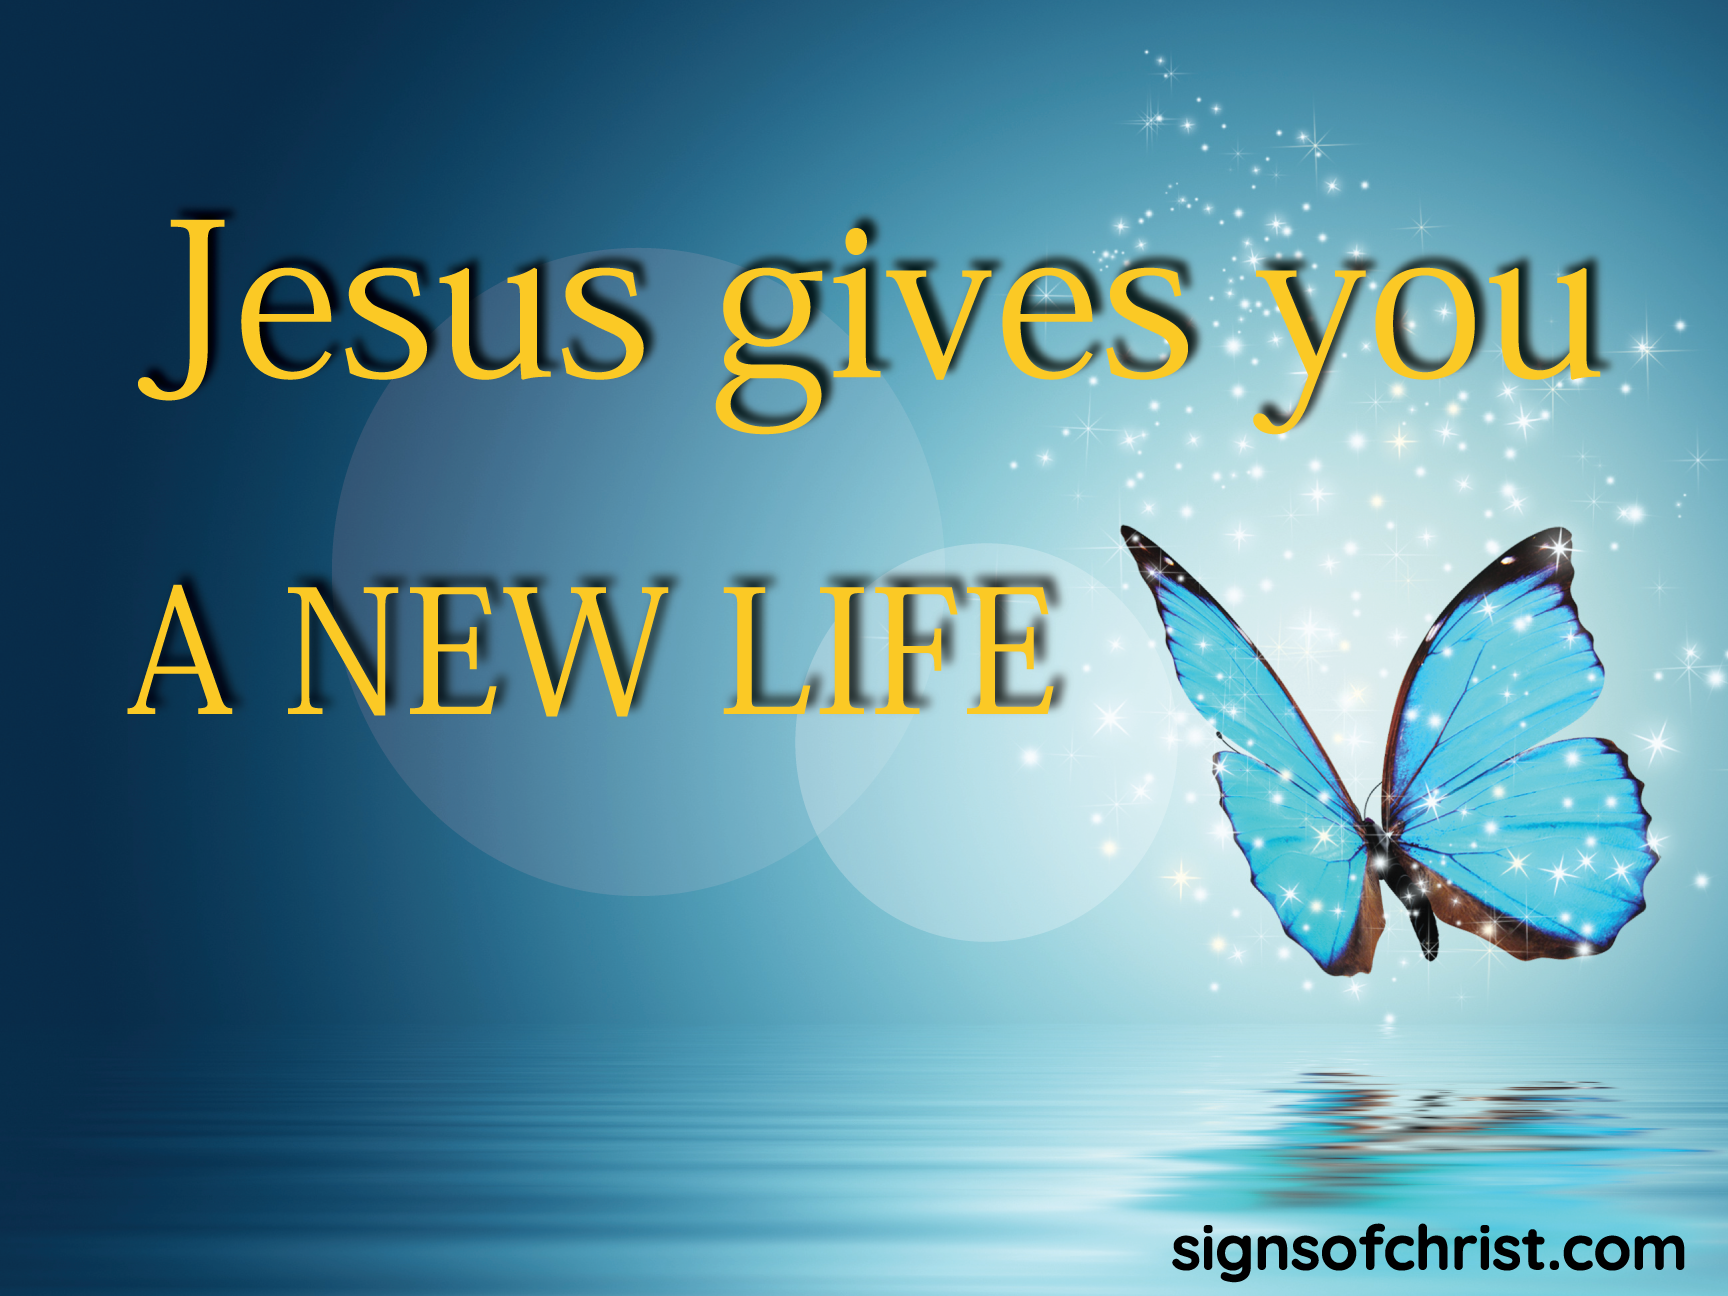 Jesus gives you a new life yard sign